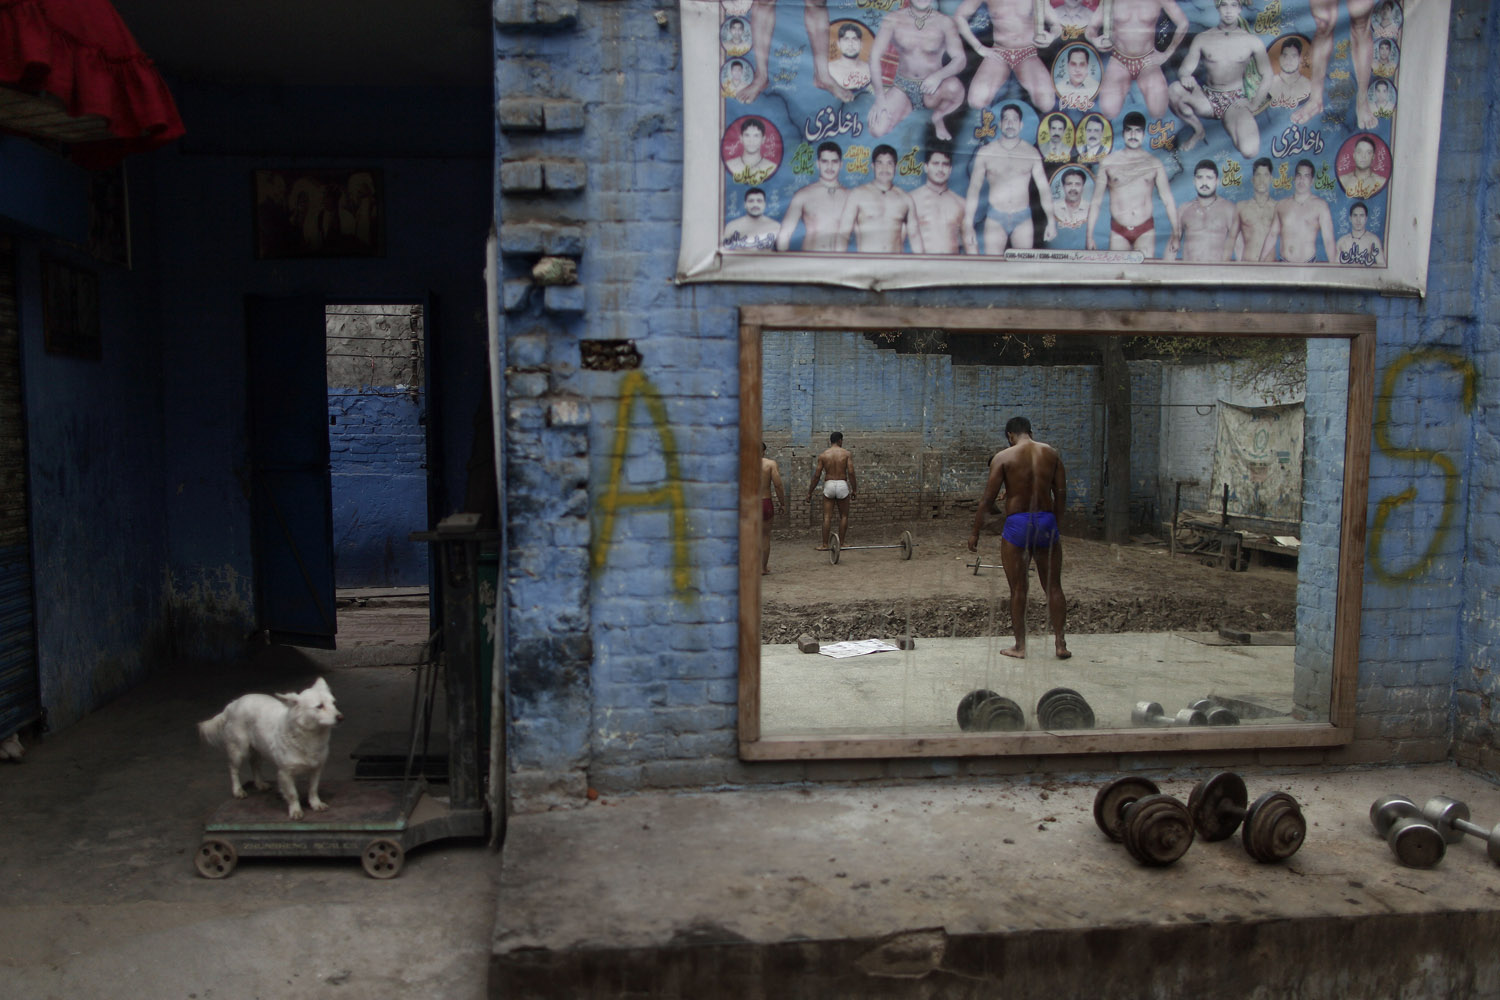 Feb. 26, 2013. A dog looks at Pakistani Kushti wrestlers, right, reflected on a mirror, attend their daily training session in Lahore, Pakistan.